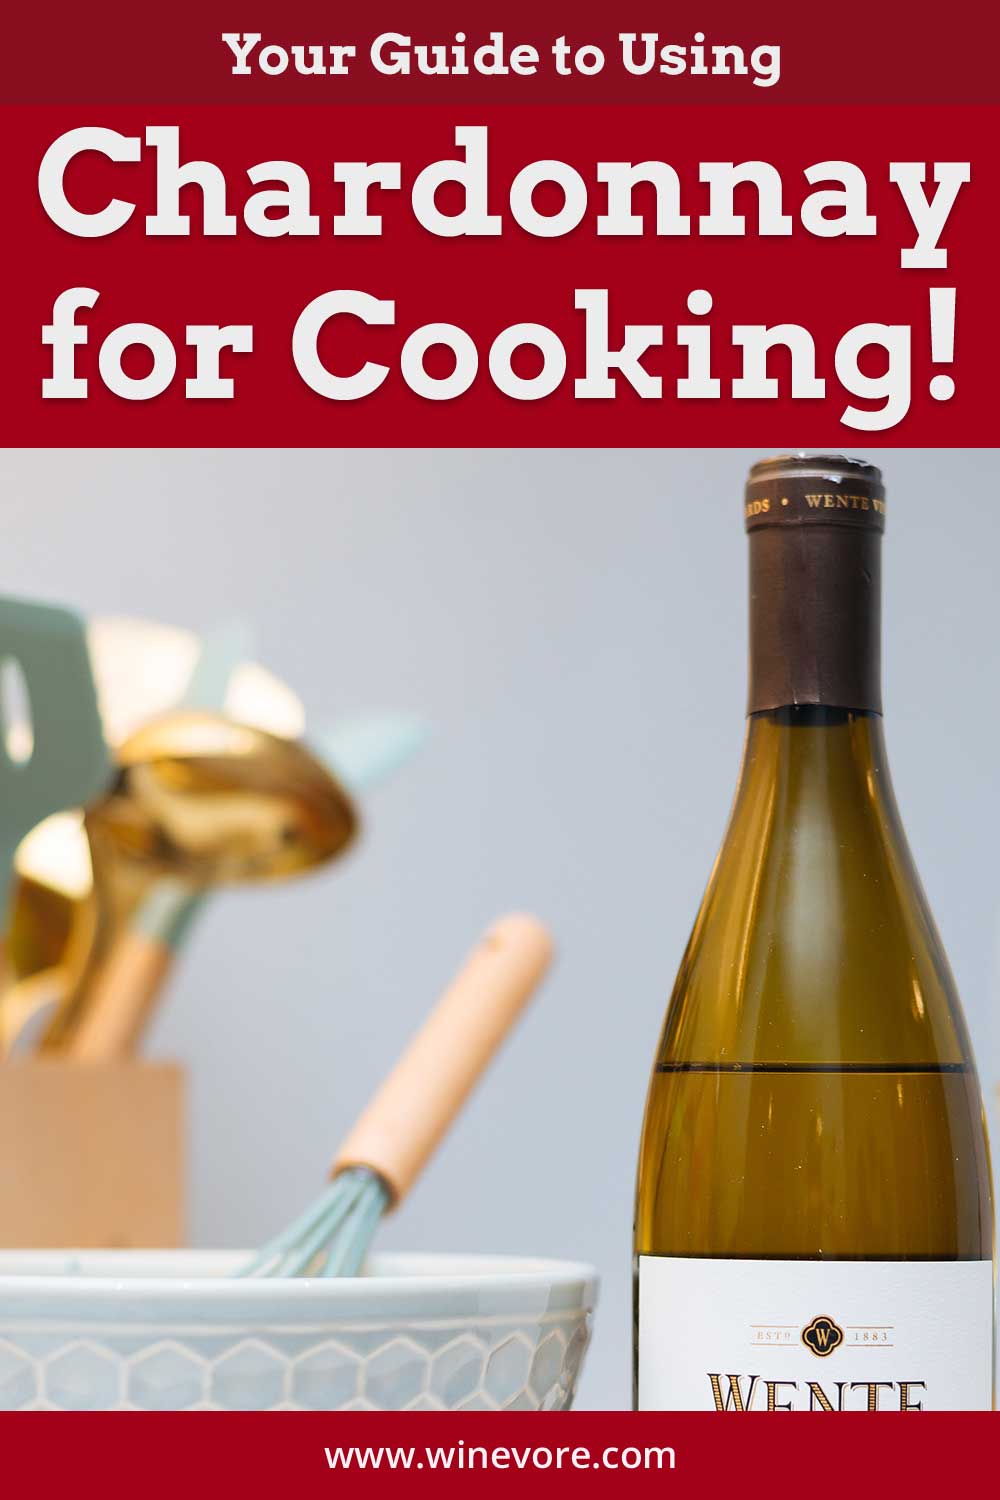 Bottle of wine near a bowl - Your Guide to Using Chardonnay for Cooking!